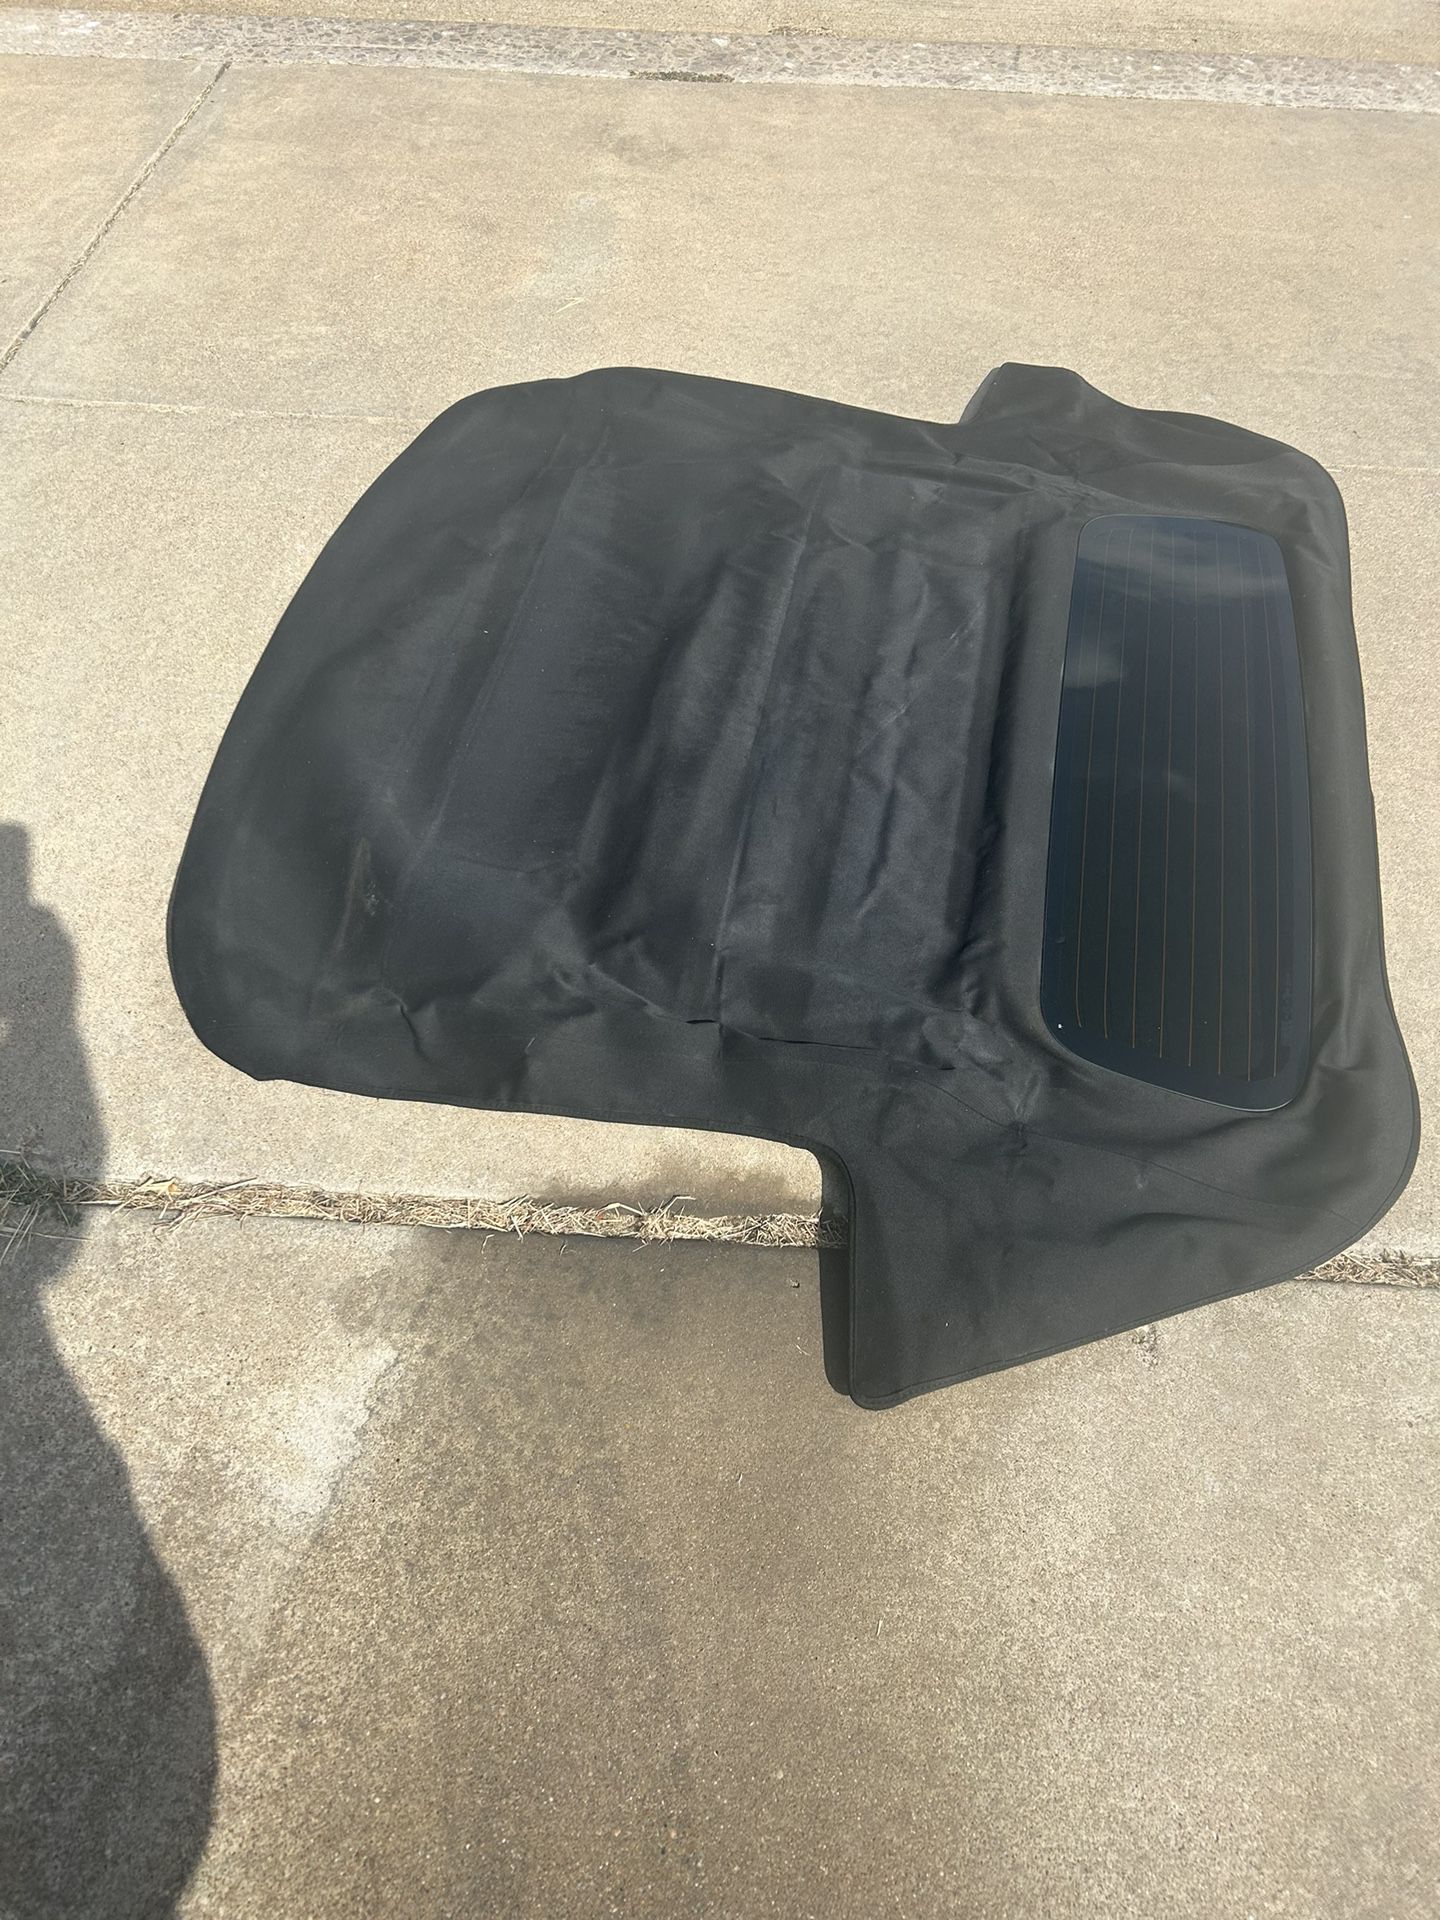 Convertible Top Fits 2014 to 2019 Chevy Corvette 